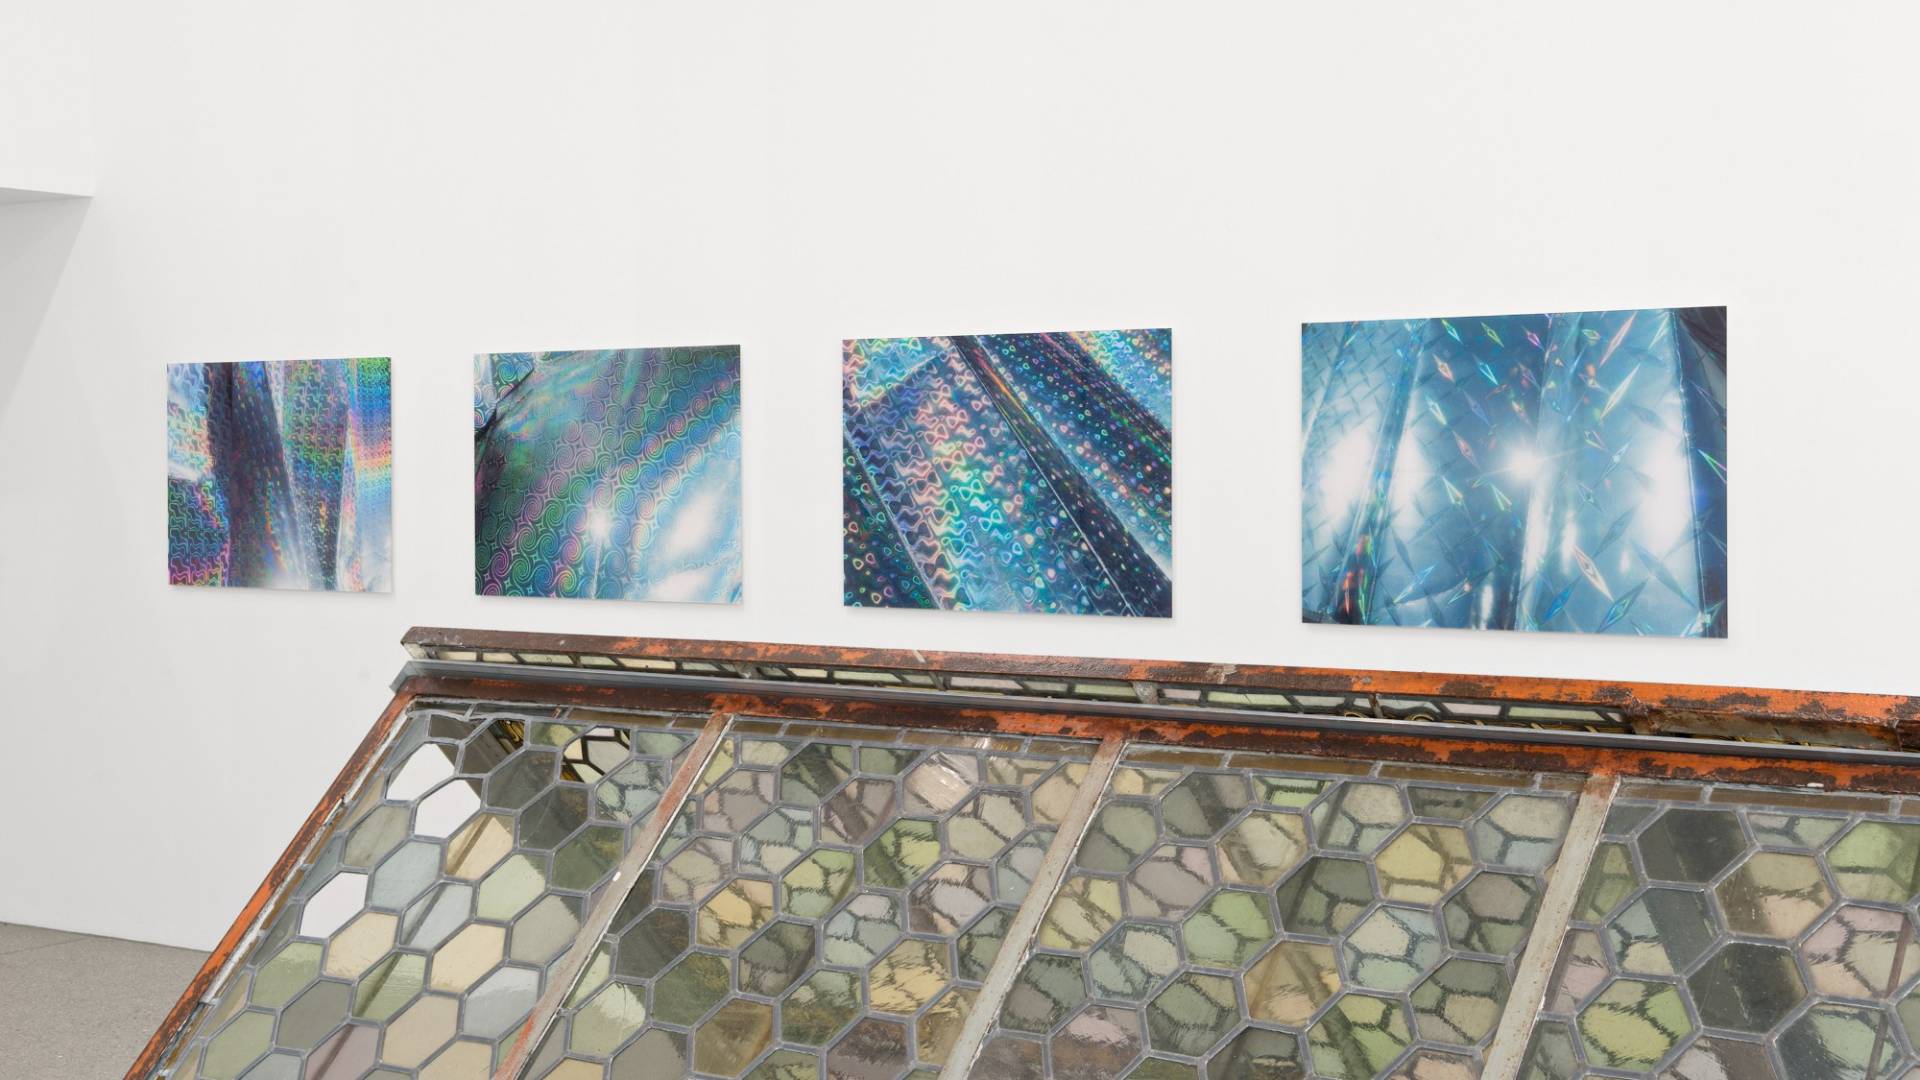 Four large-format photographs show silvery insulation mats in close-up, shimmering in all the colours of the rainbow.